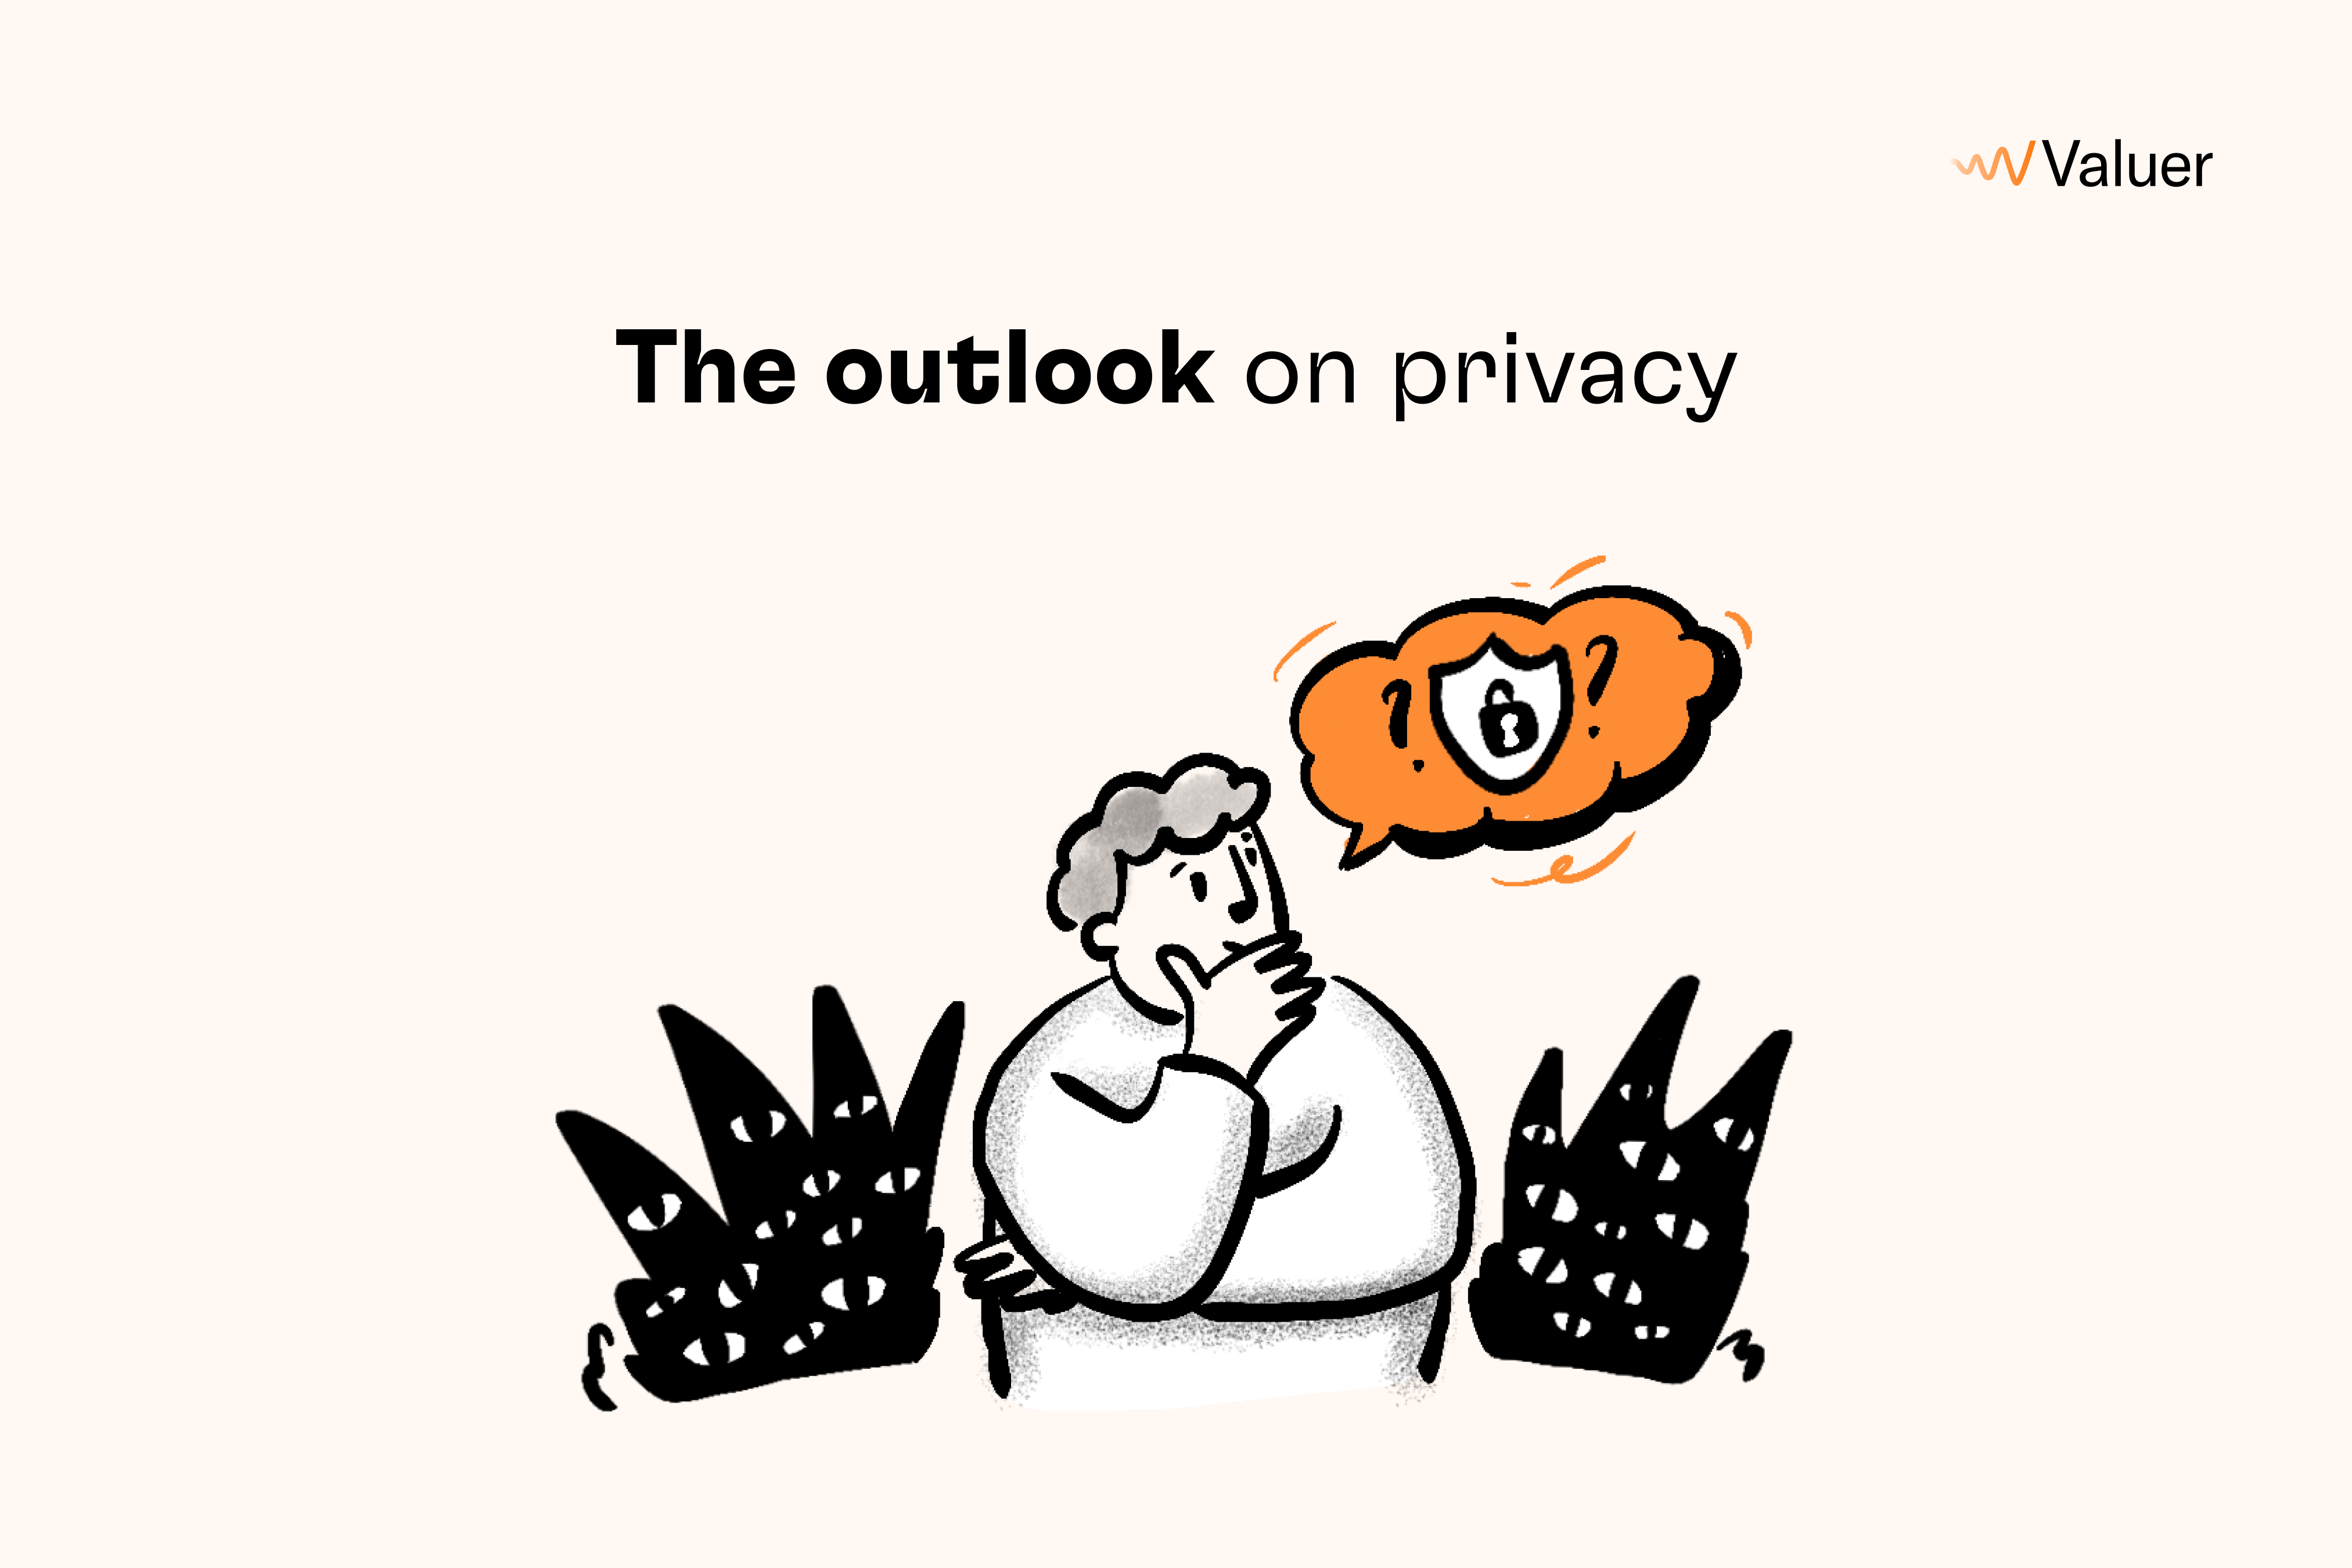 The outlook on privacy